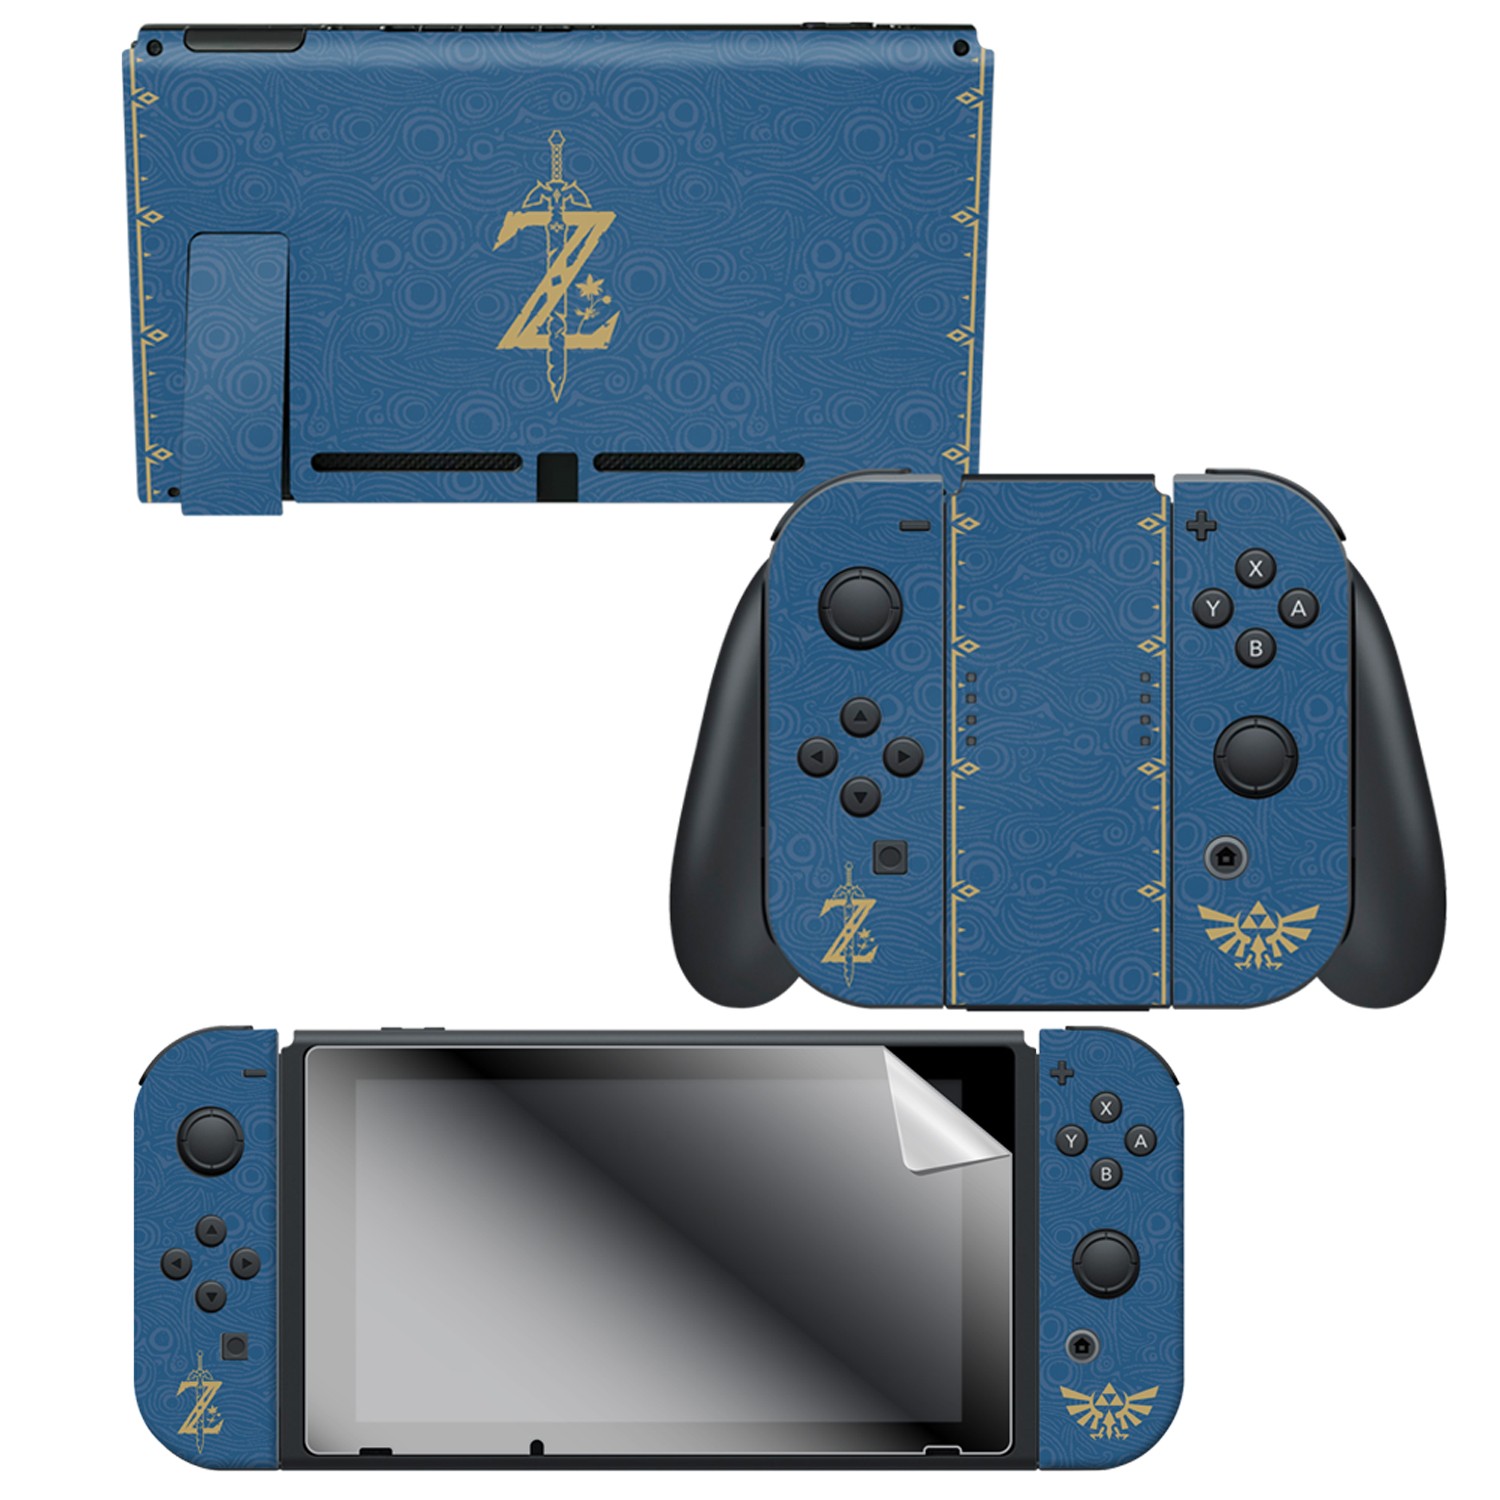 themed switch consoles